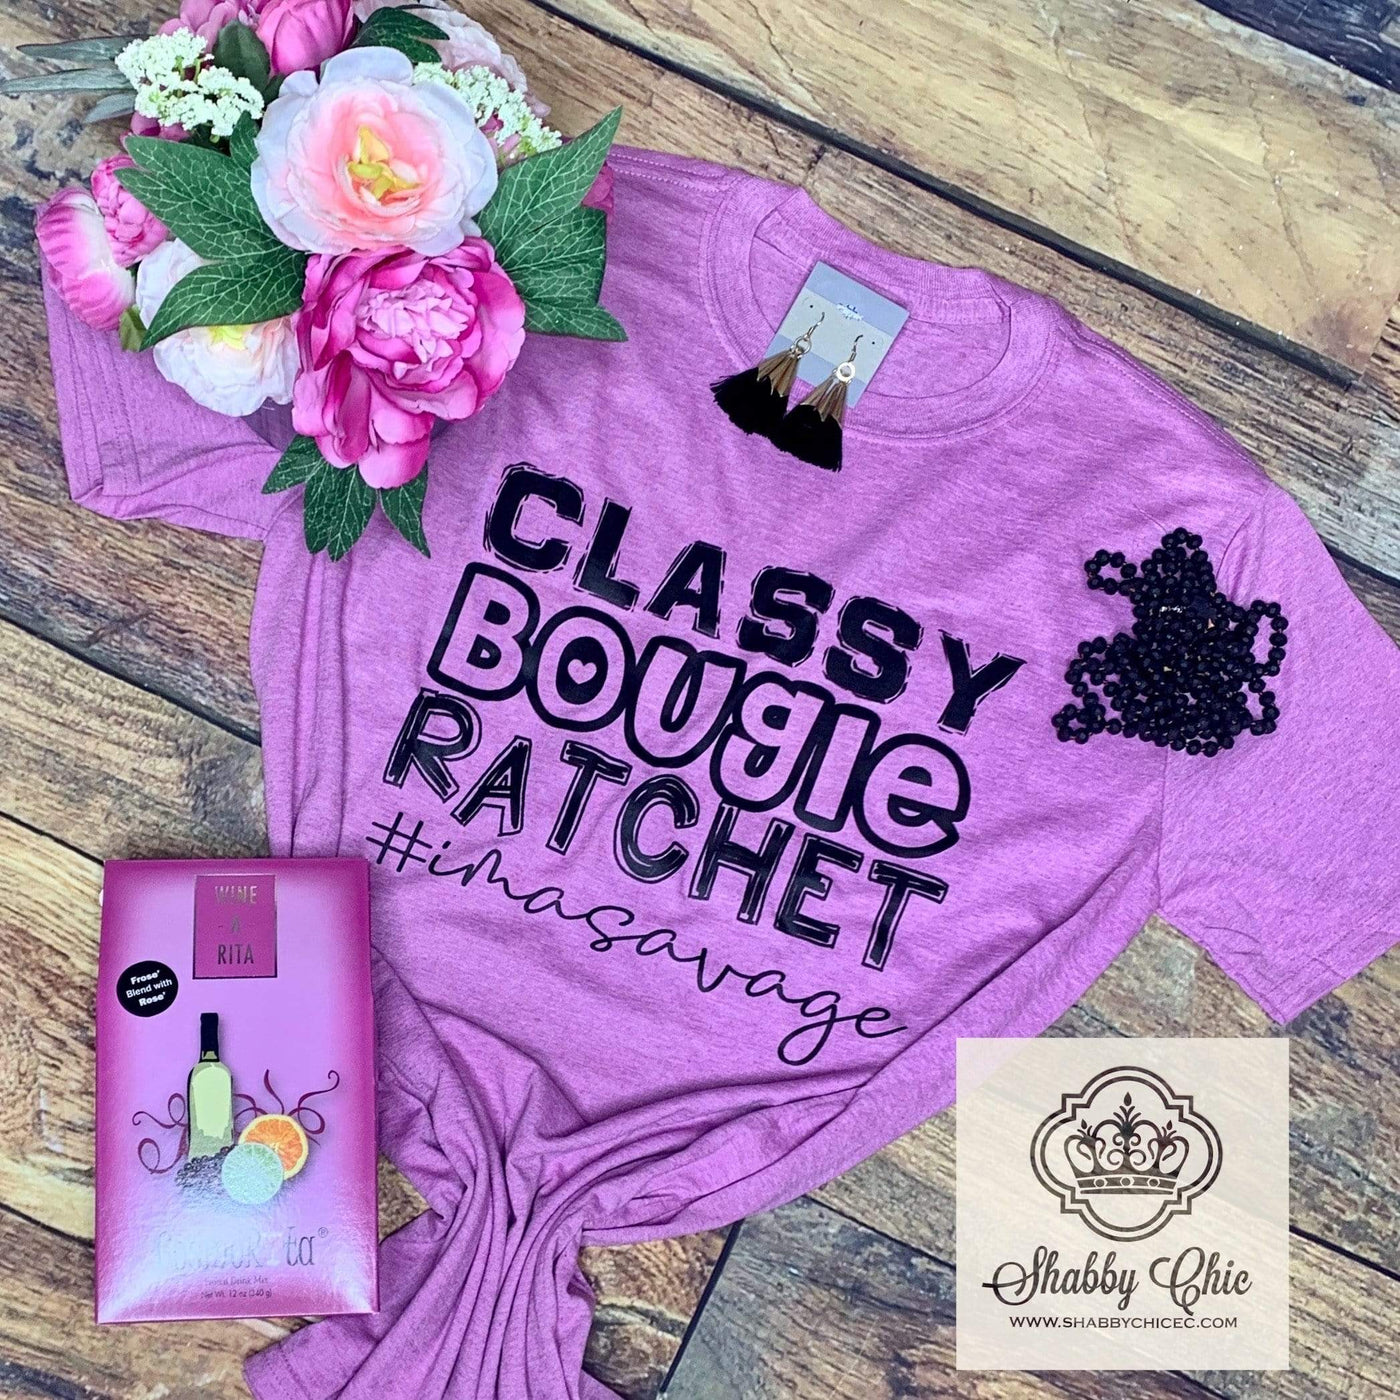 Classy Bougie Ratchet #imasavage Shabby Chic Boutique and Tanning Salon